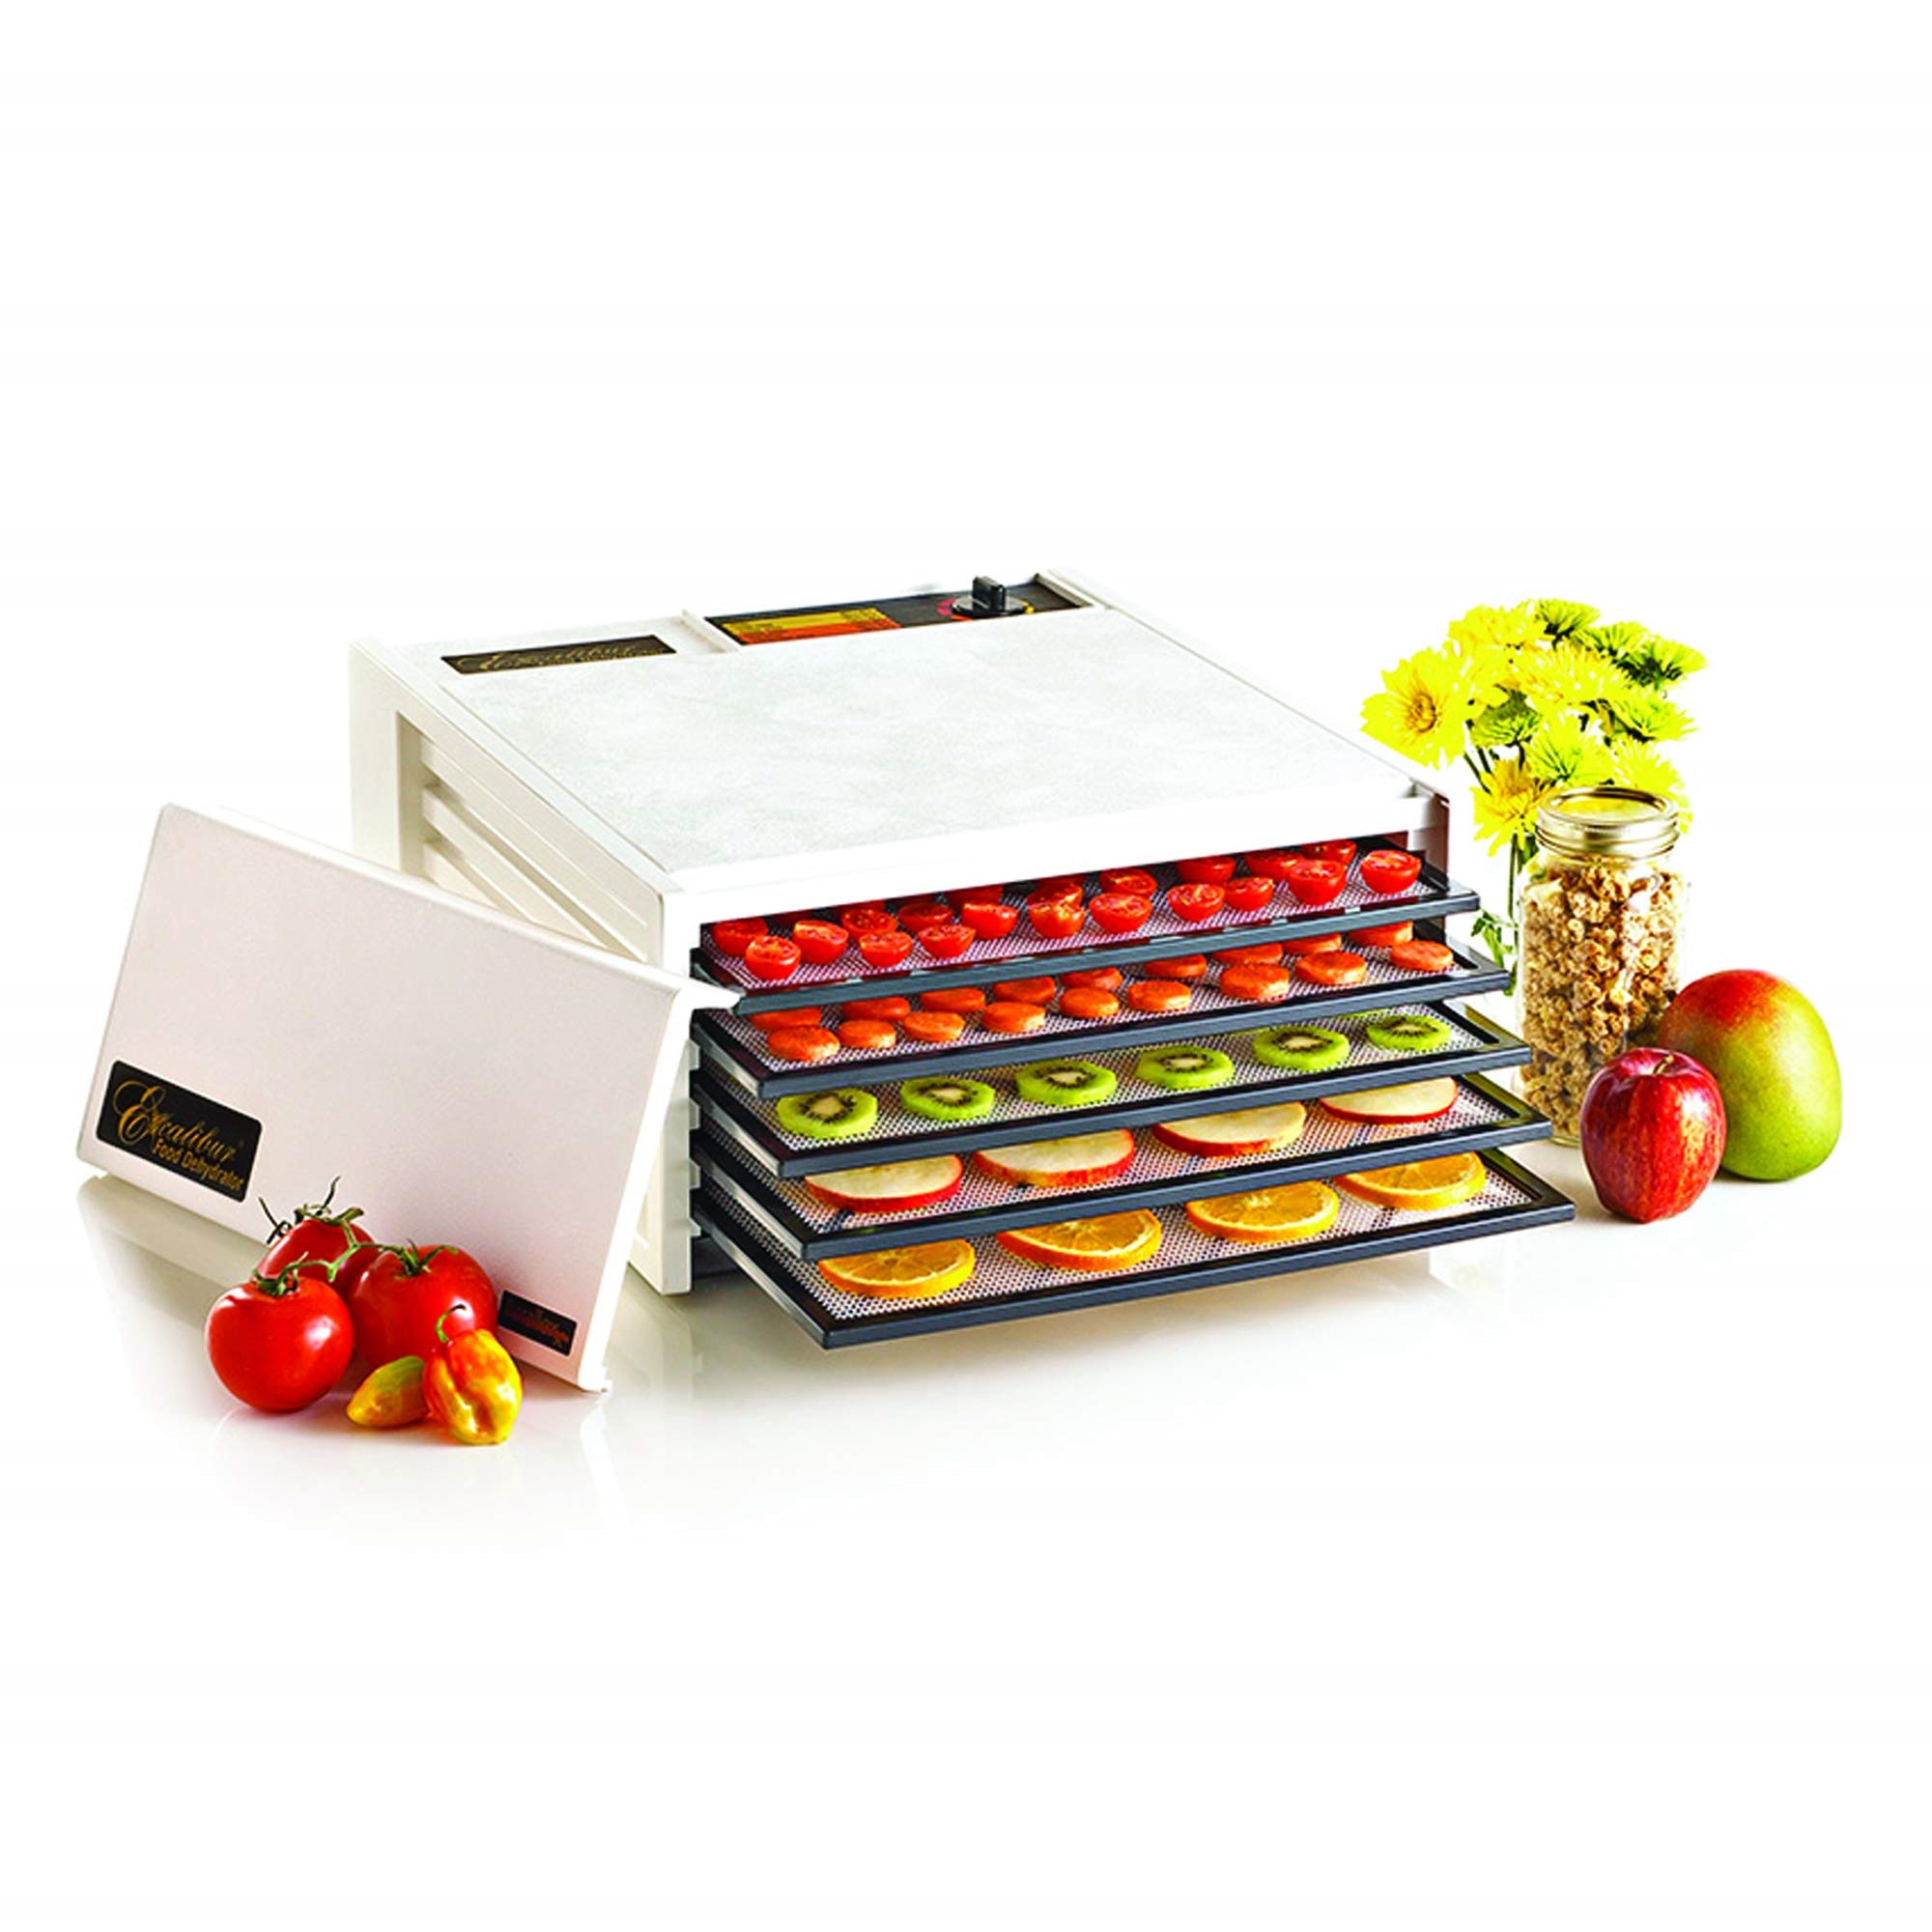 Excalibur 3500W 5 Tray Solid Door Electric Food Dehydrator White